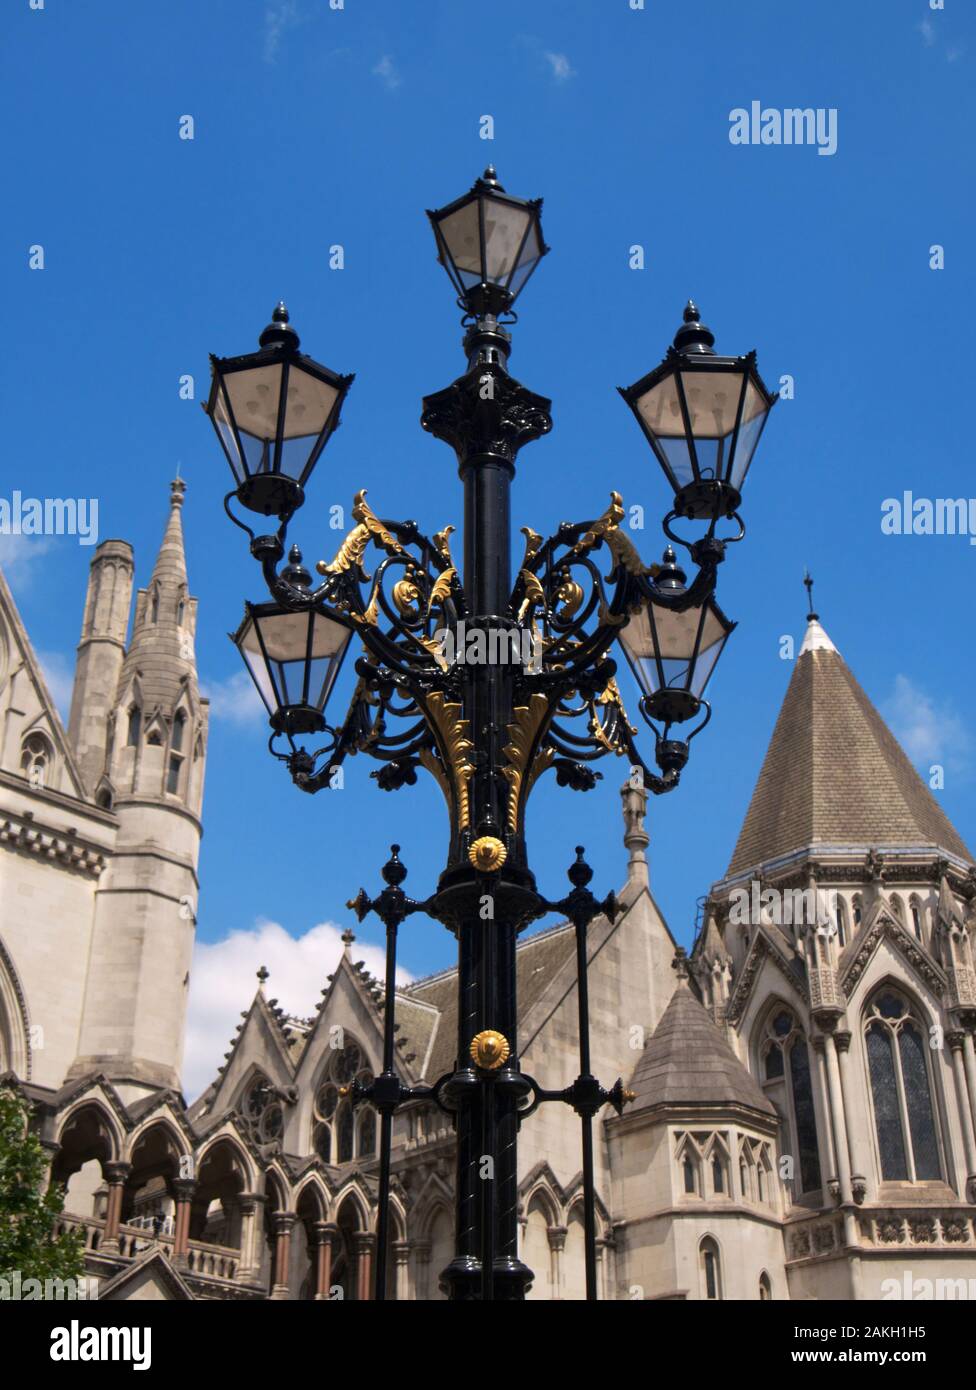 Decorative Victorian lampost outside the Royal Courts of Justice, London Stock Photo